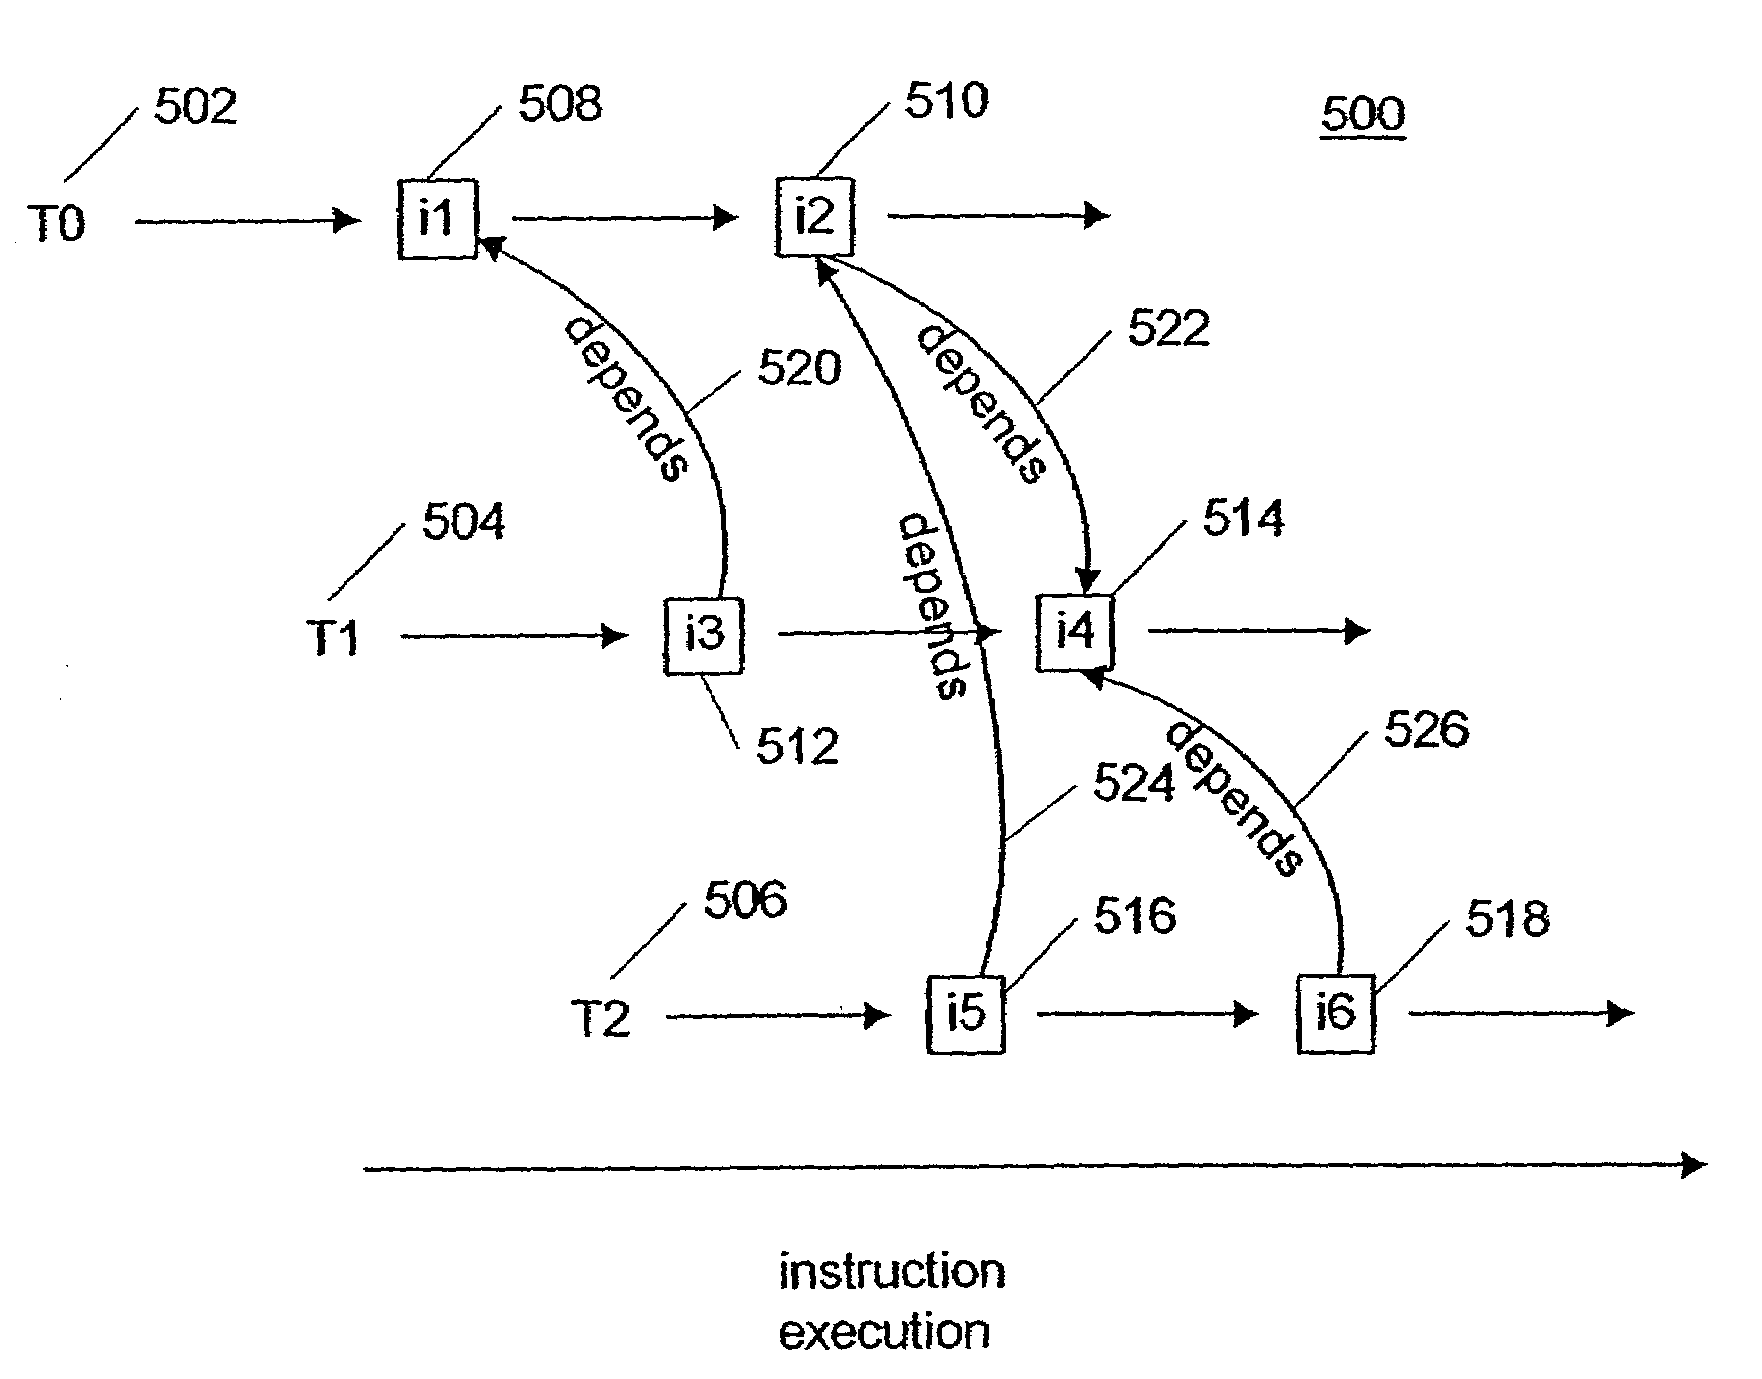 System and method for instruction-level parallelism in a programmable multiple network processor environment